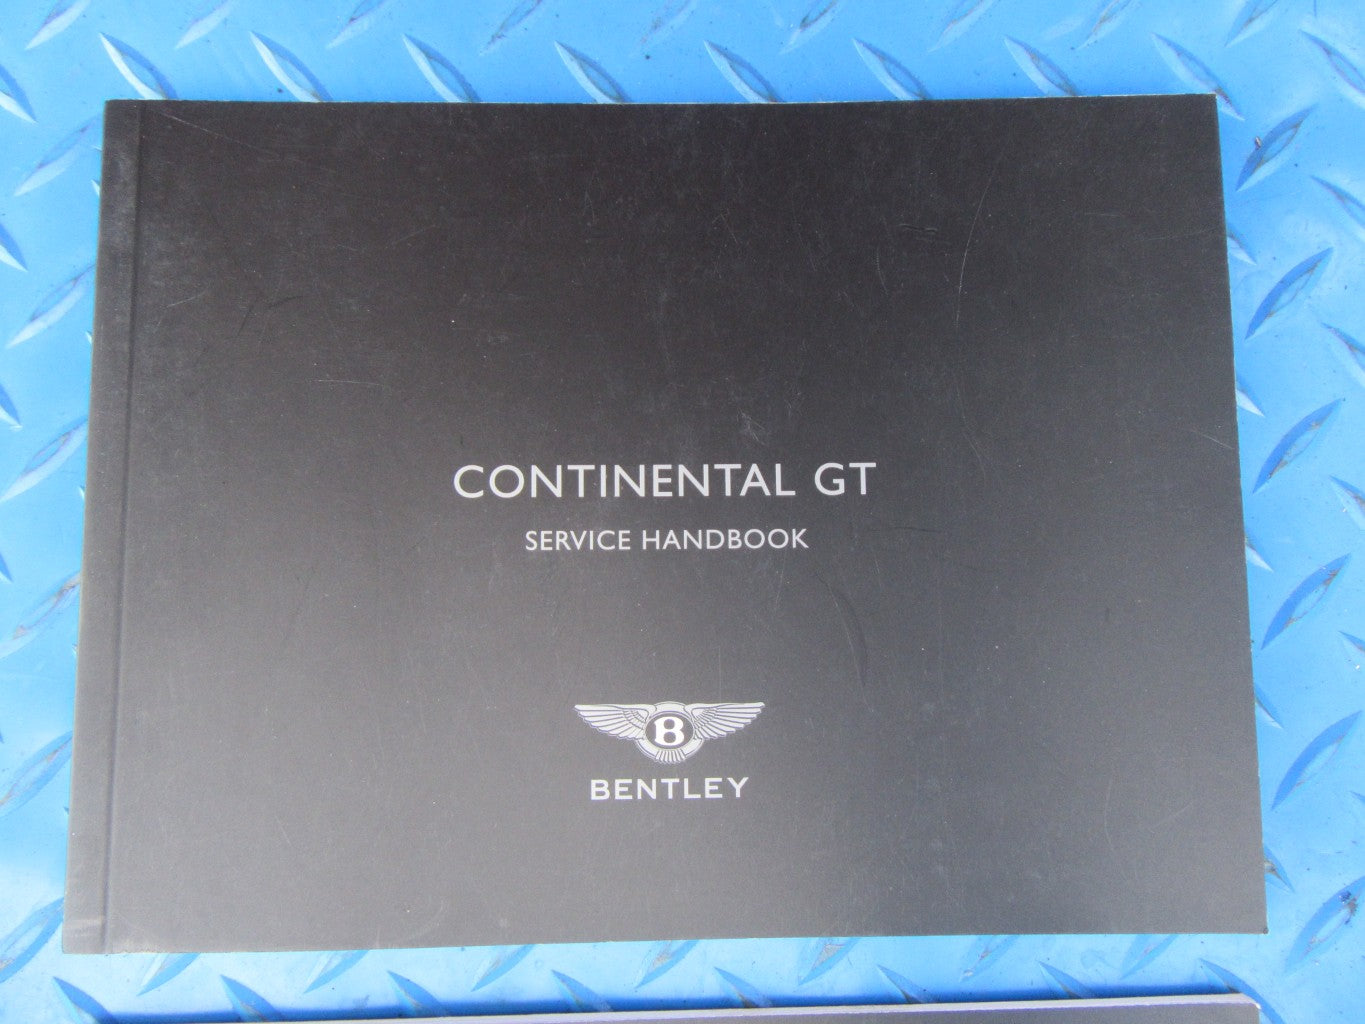 Bentley Continental GT service handbook and consumer protection booklet #0103